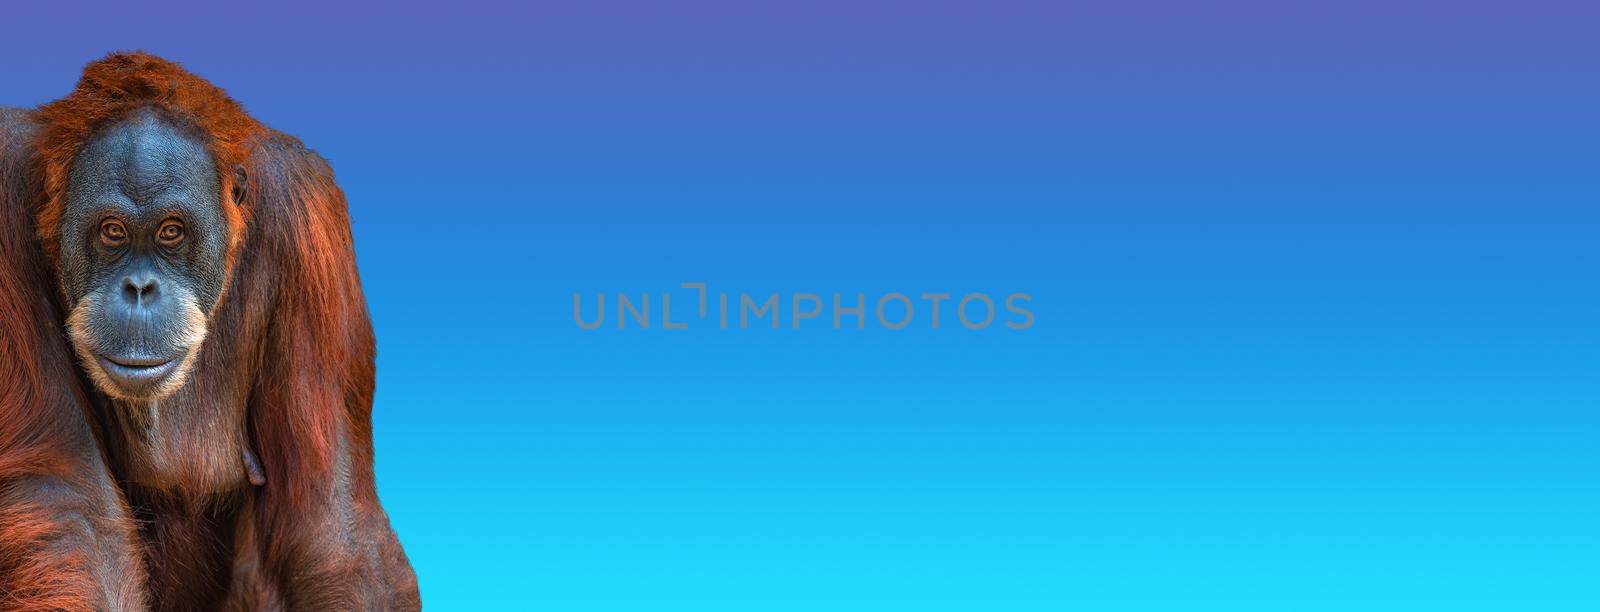 Banner with portrait of funny colorful Asian orangutan at blue sky background with copy space for text. Concept animal diversity and wildlife conservation